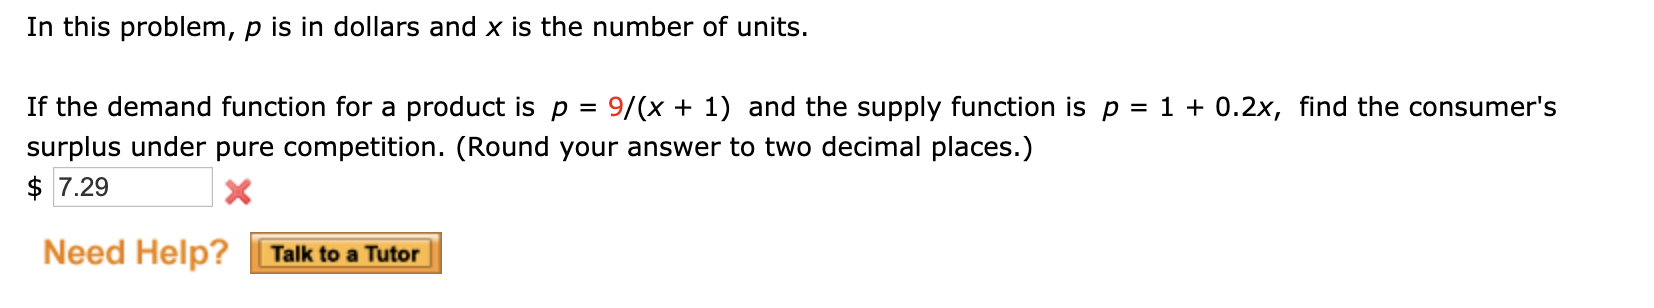 In this problem, p is in dollars and x is the number of units.
If the demand function for a product is p =
surplus under pure competition. (Round your answer to two decimal places.)
$ 7.29
9/(x + 1) and the supply function is p = 1 + 0.2x, find the consumer's
%3D
Need Help?
Talk to a Tutor
